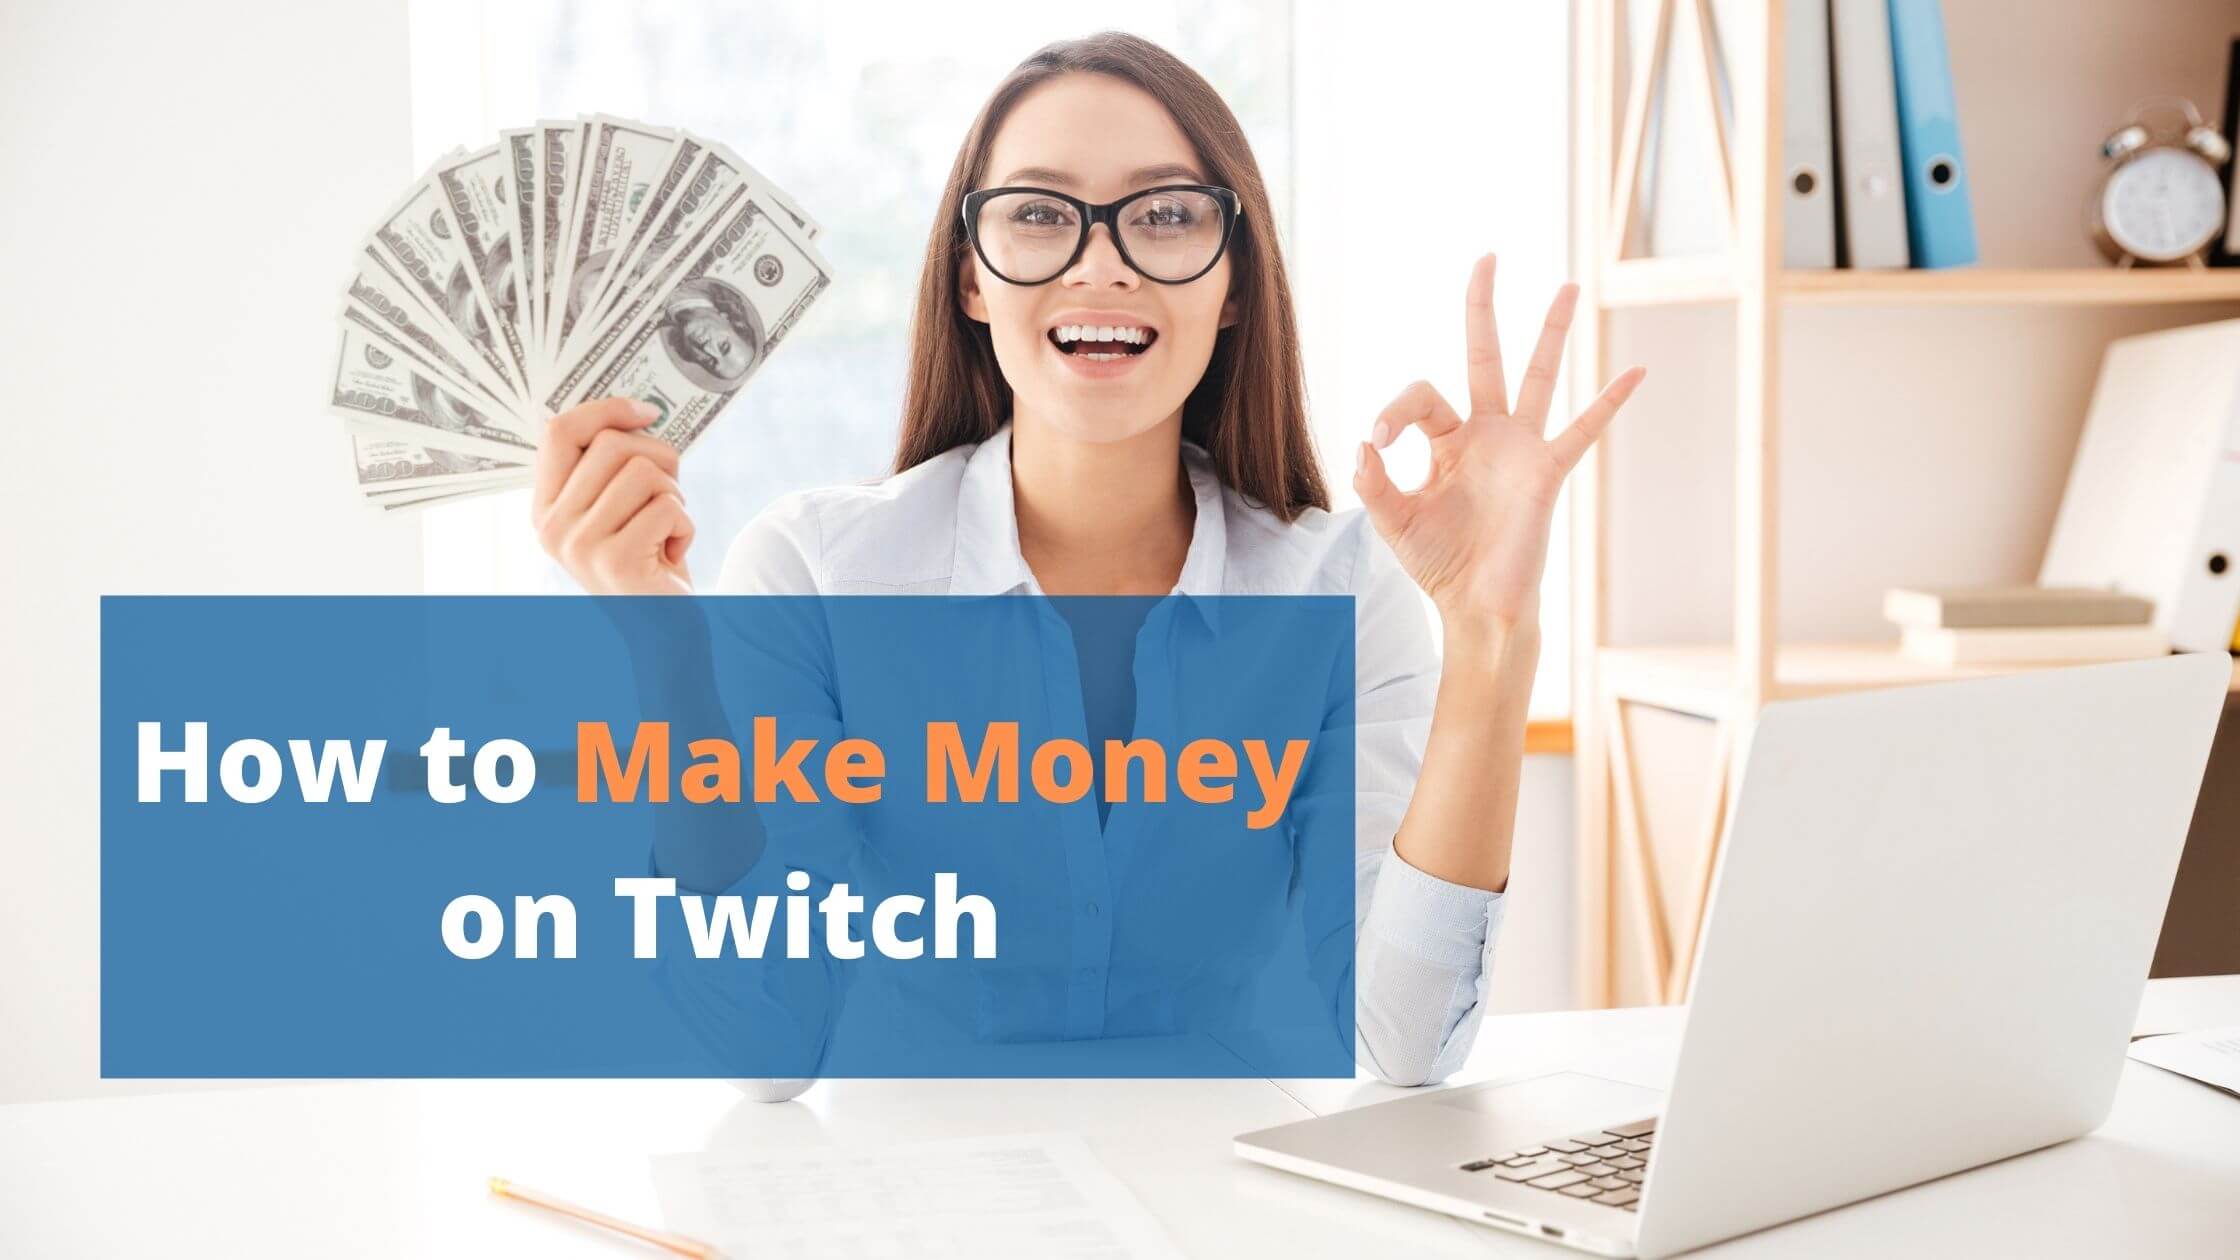 How to make money on Twitch